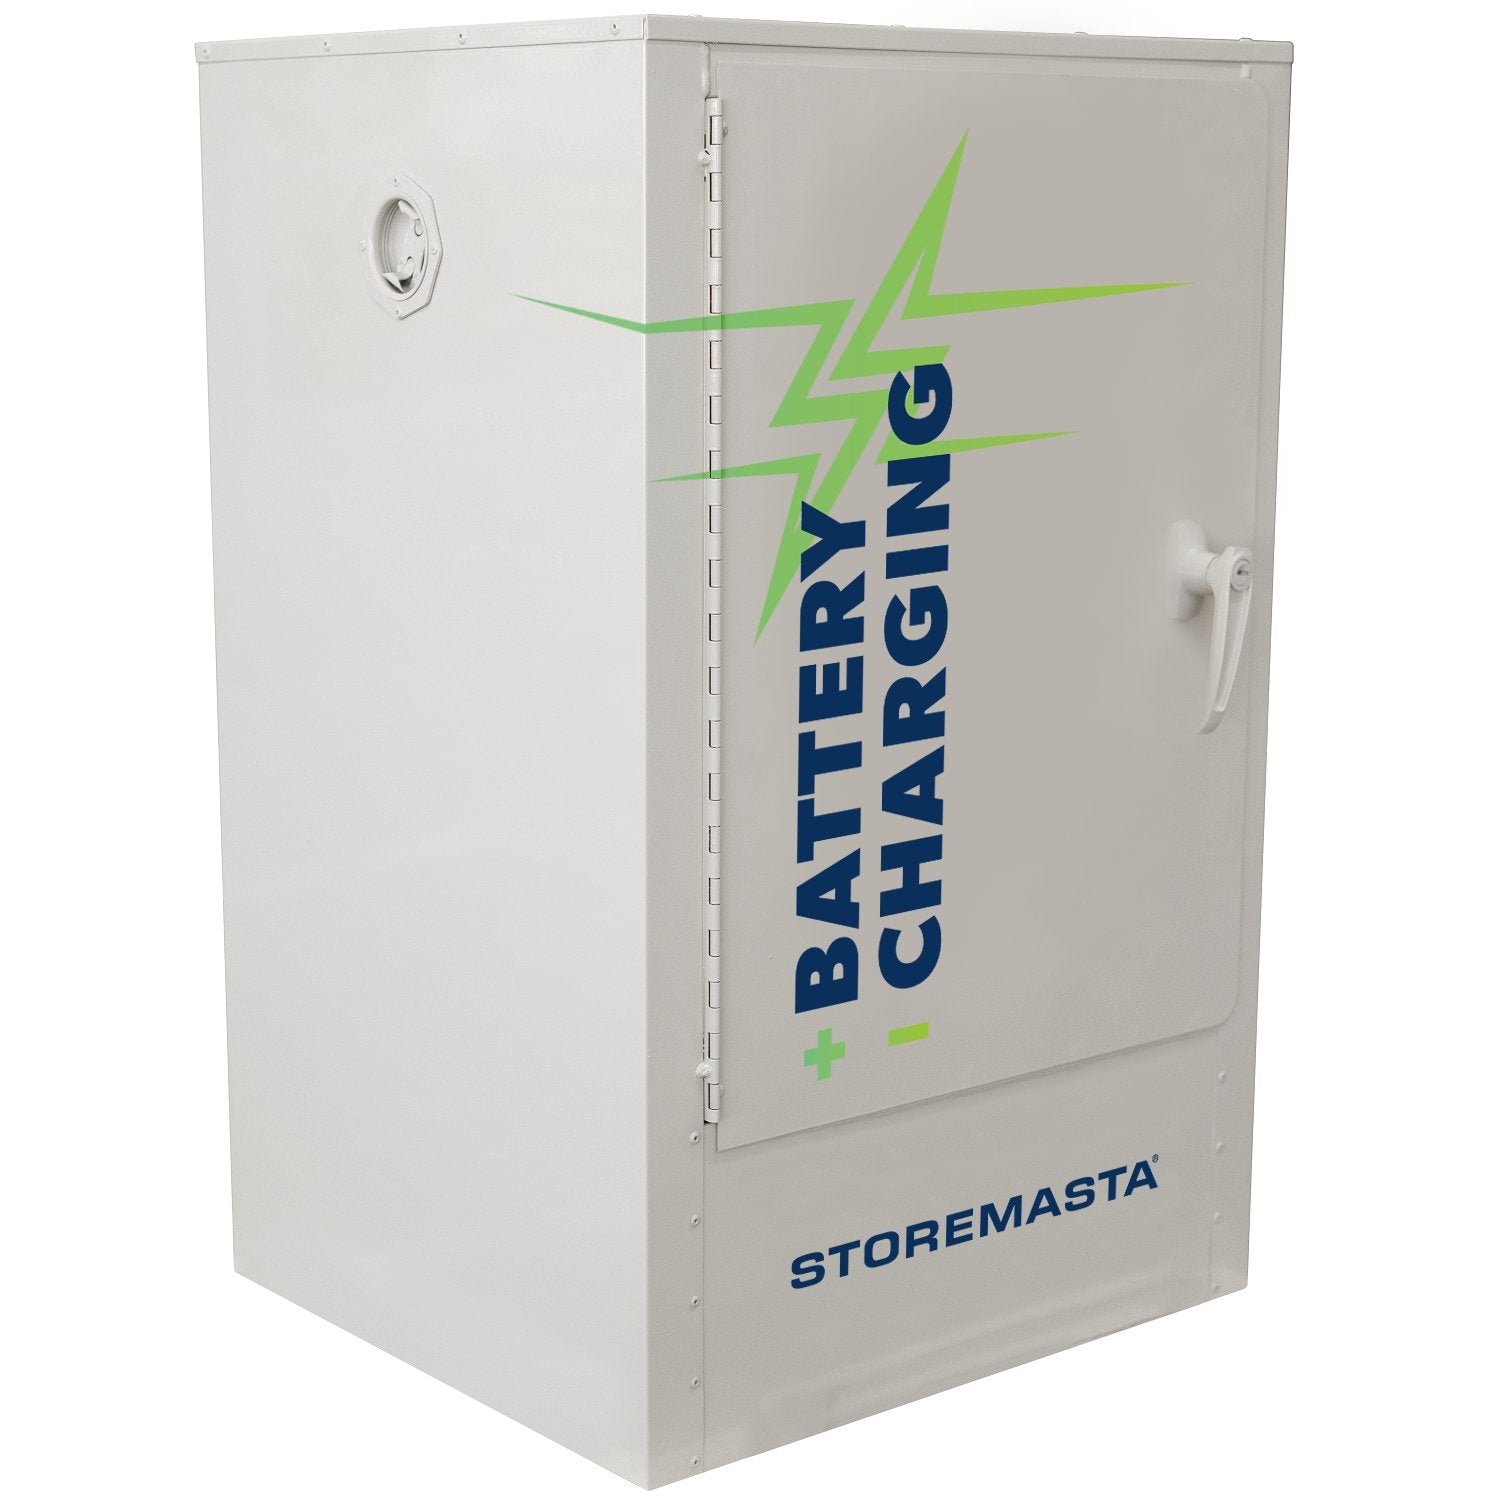 Lithium-ion Battery Cabinets